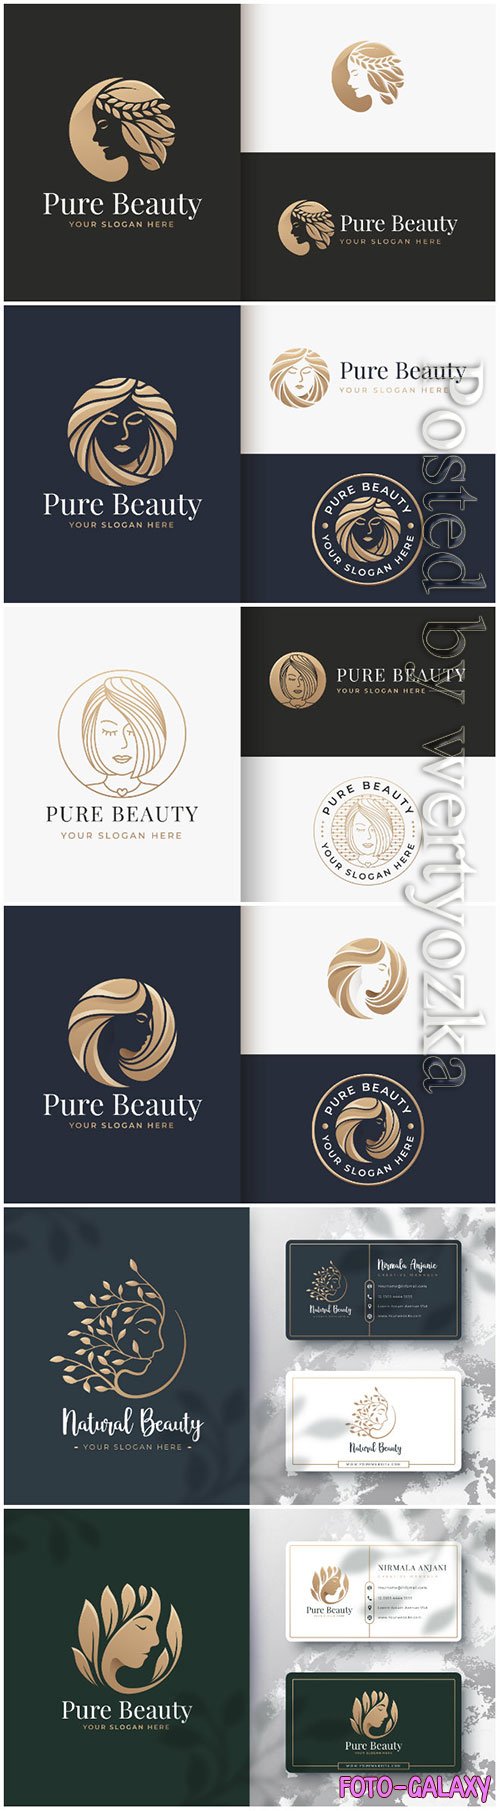 Beauty logo and business card design premium vector